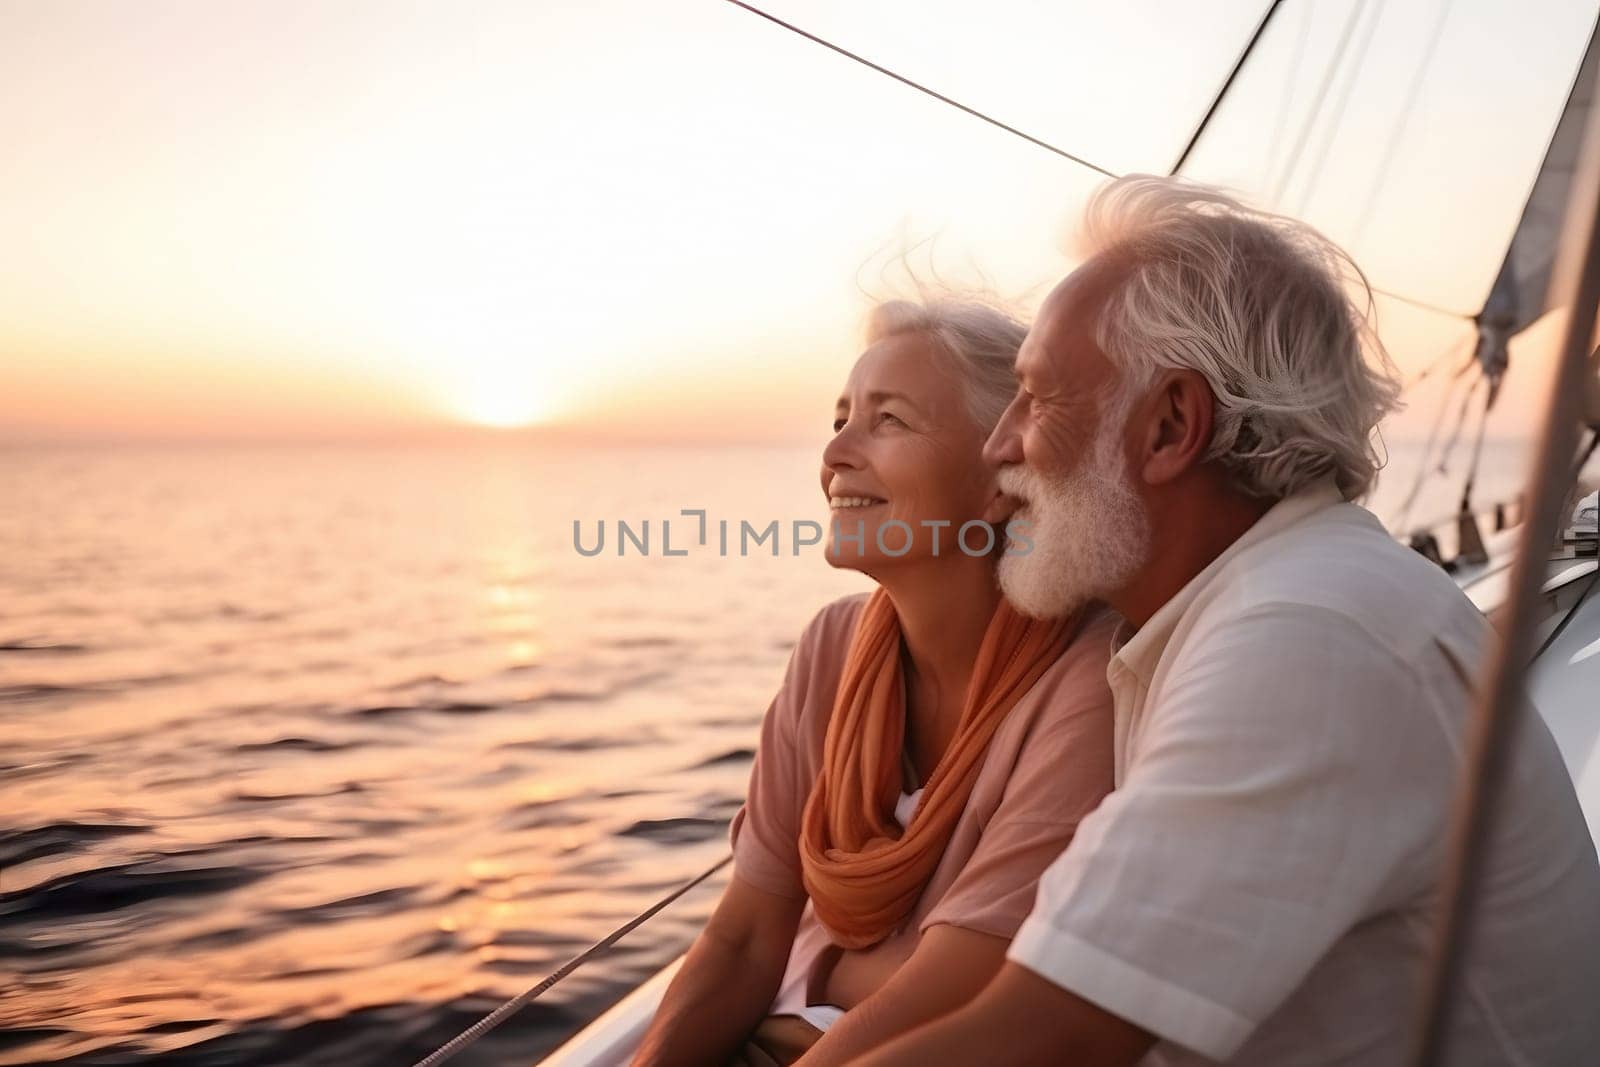 Beautiful and happy senior caucasian couple on a sailboat at sunset or sunrise. Neural network generated in May 2023. Not based on any actual person, scene or pattern.